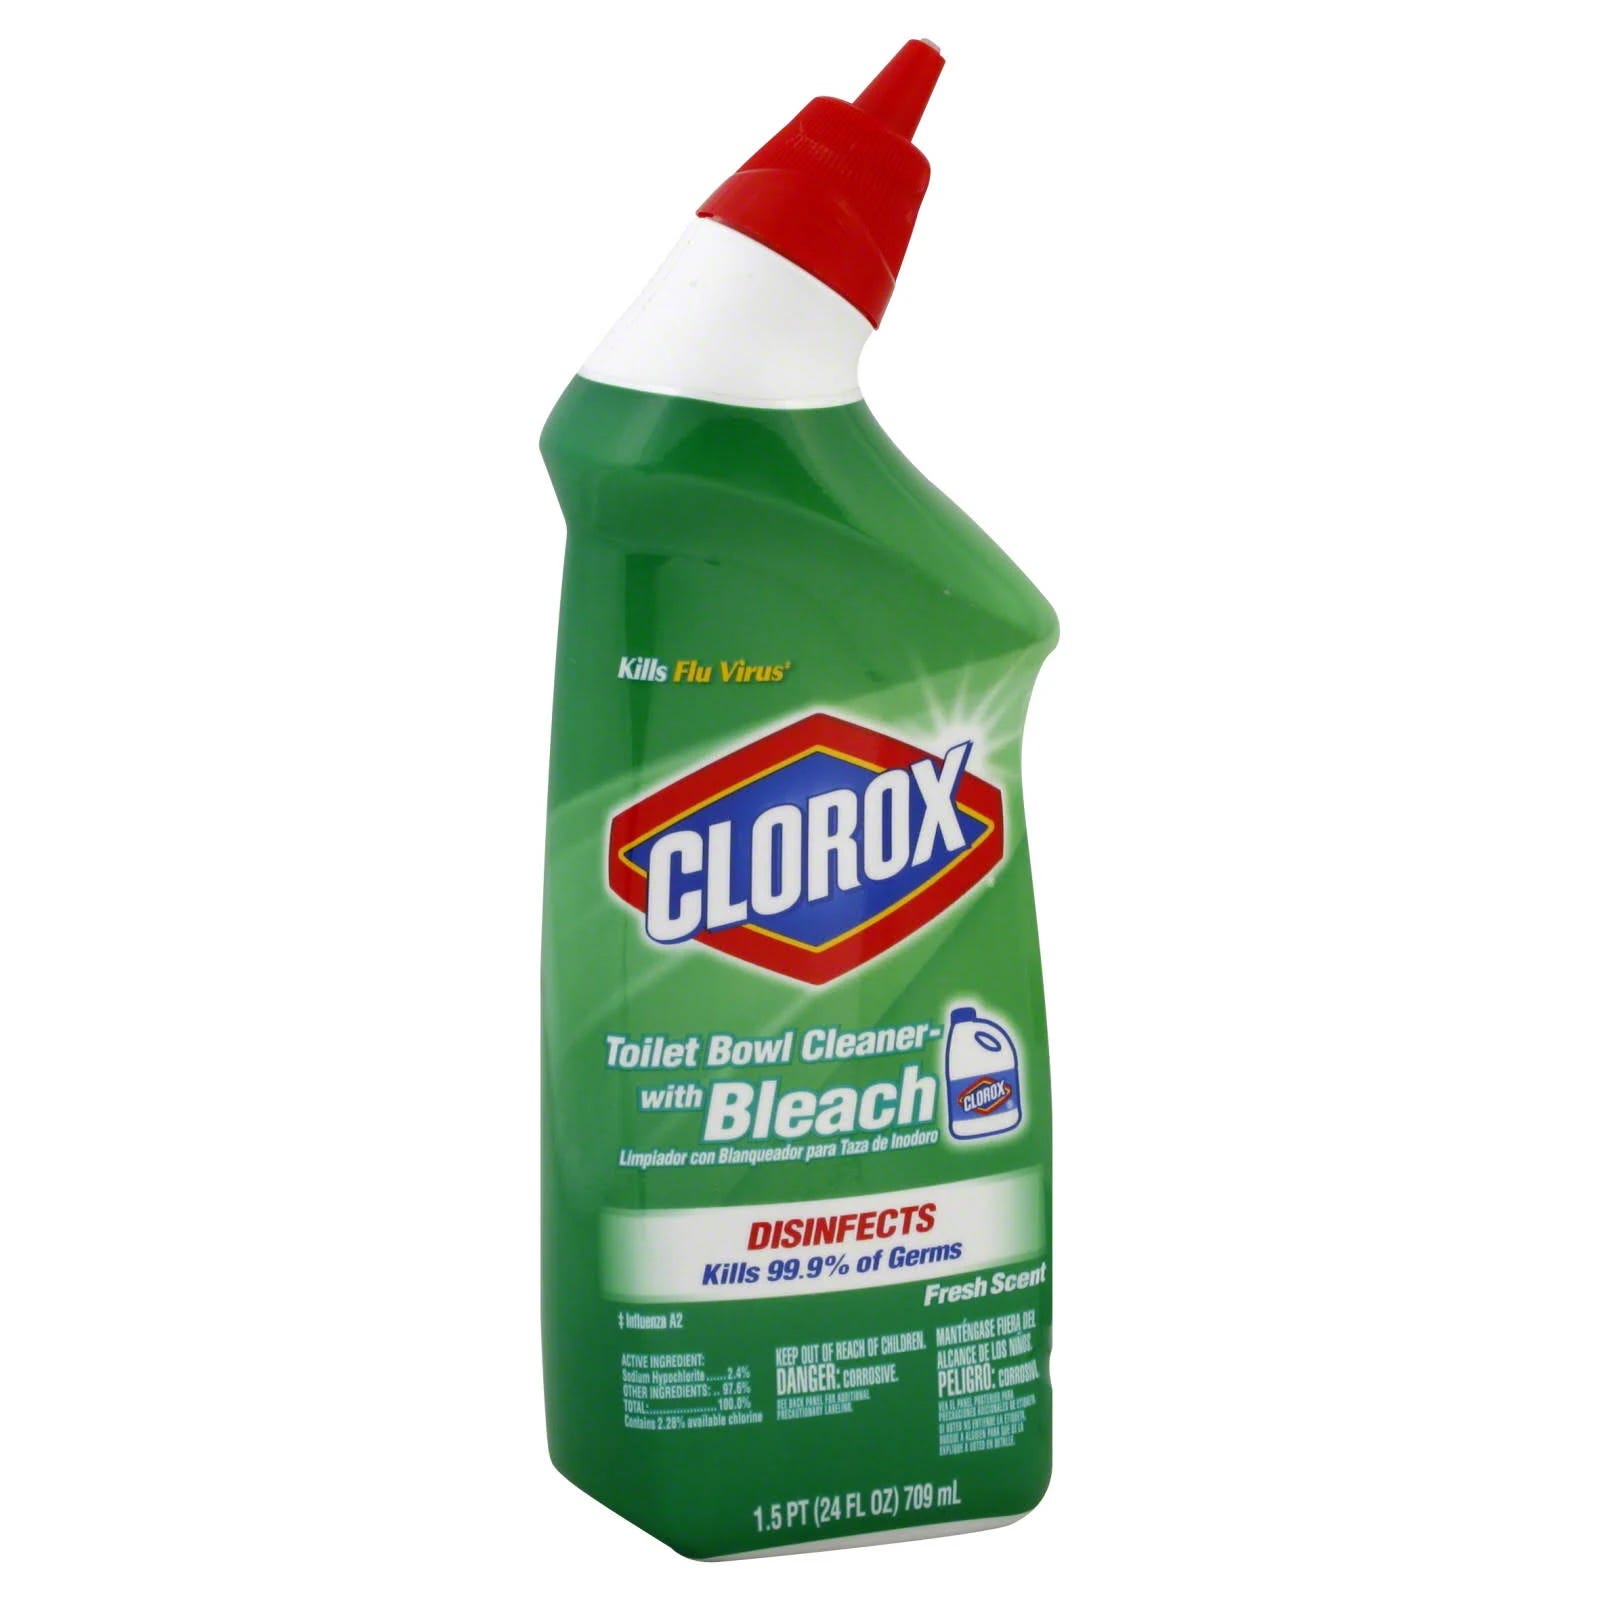 Clorox Toilet Bowl Cleaner: Splash Toilet Deep Cleaner and Deodorizer with Fresh Scent and Bleach | Image